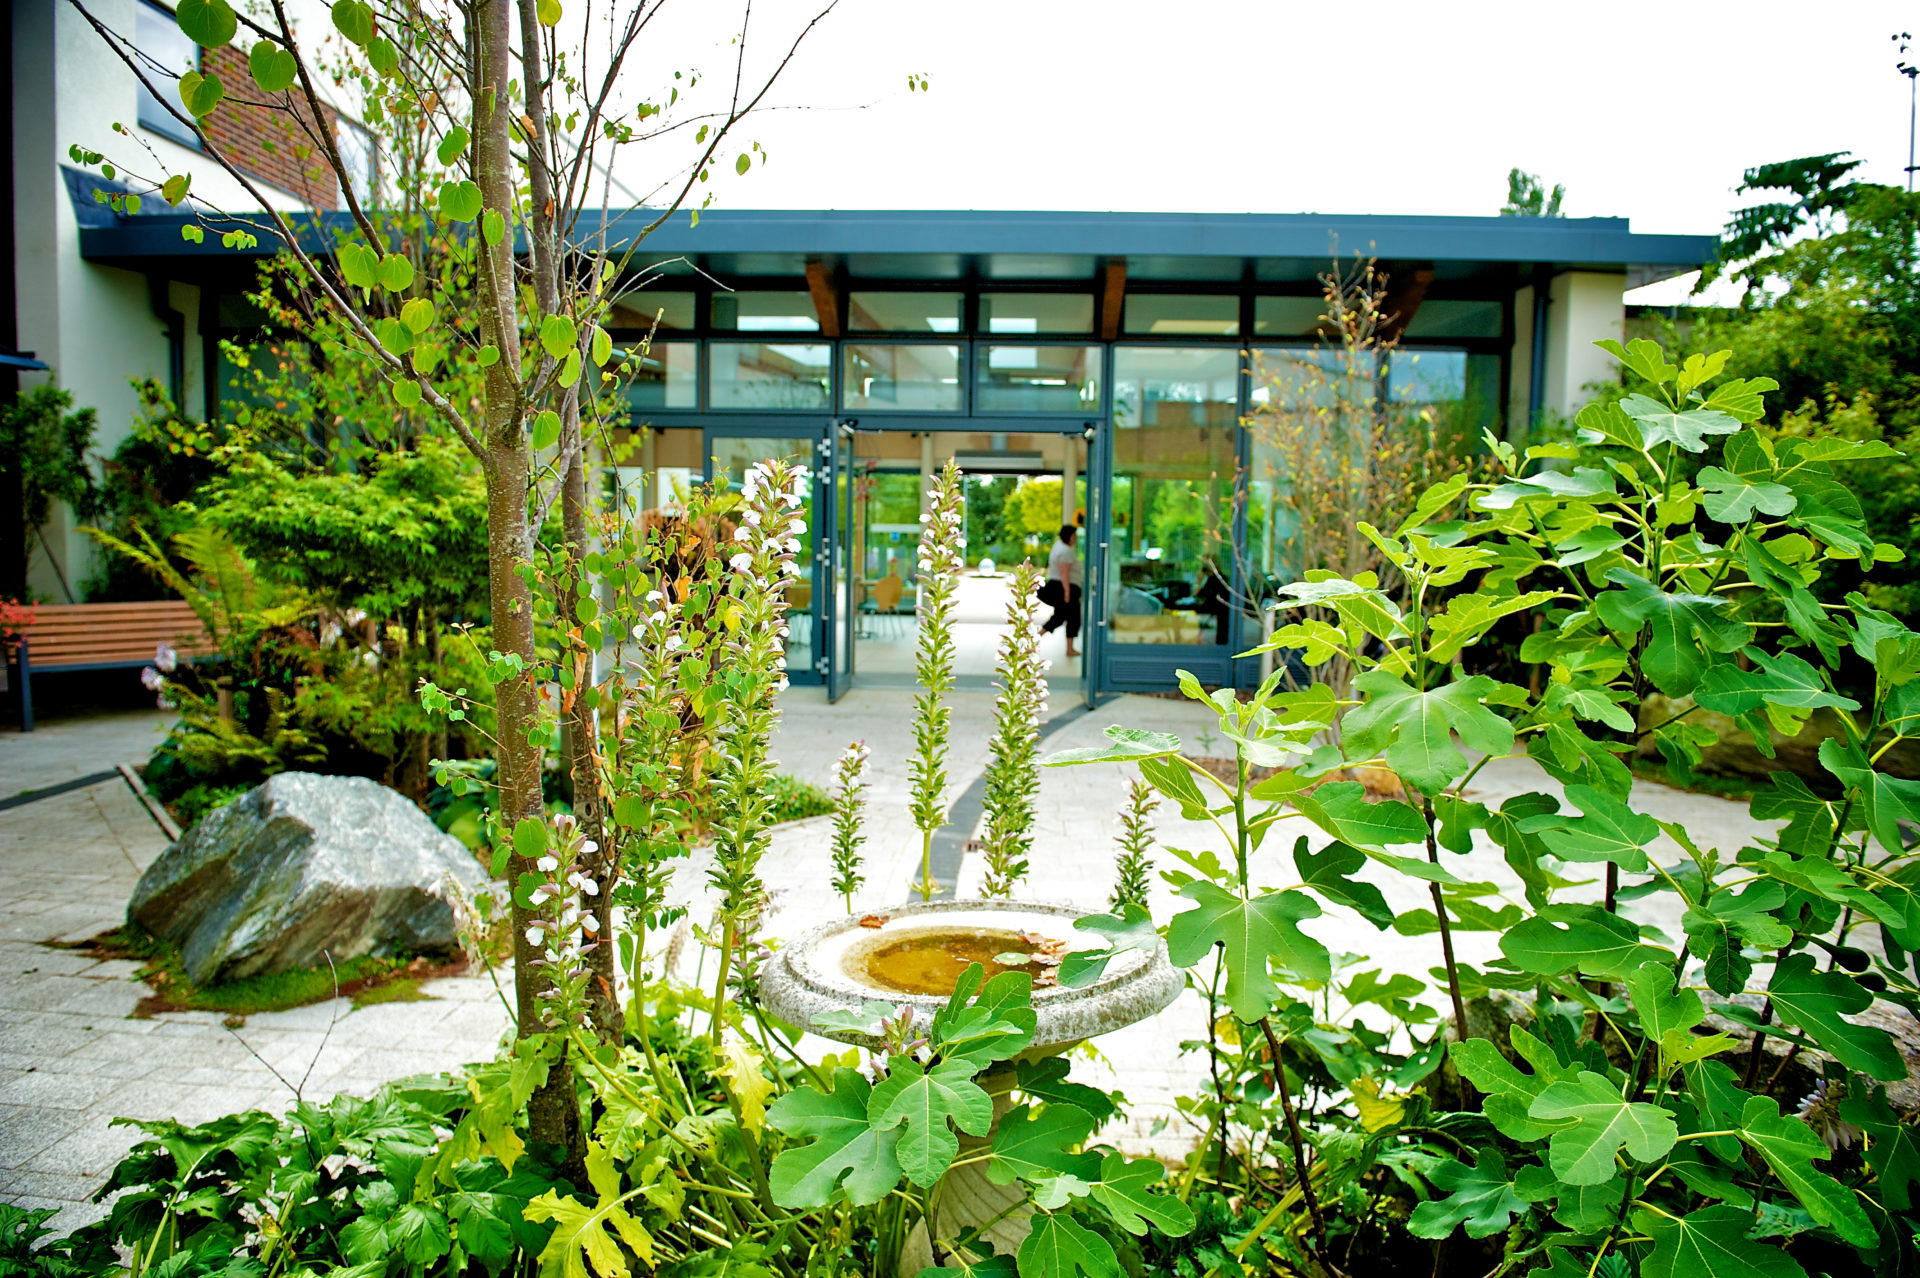 Image of the gardens at the hospice